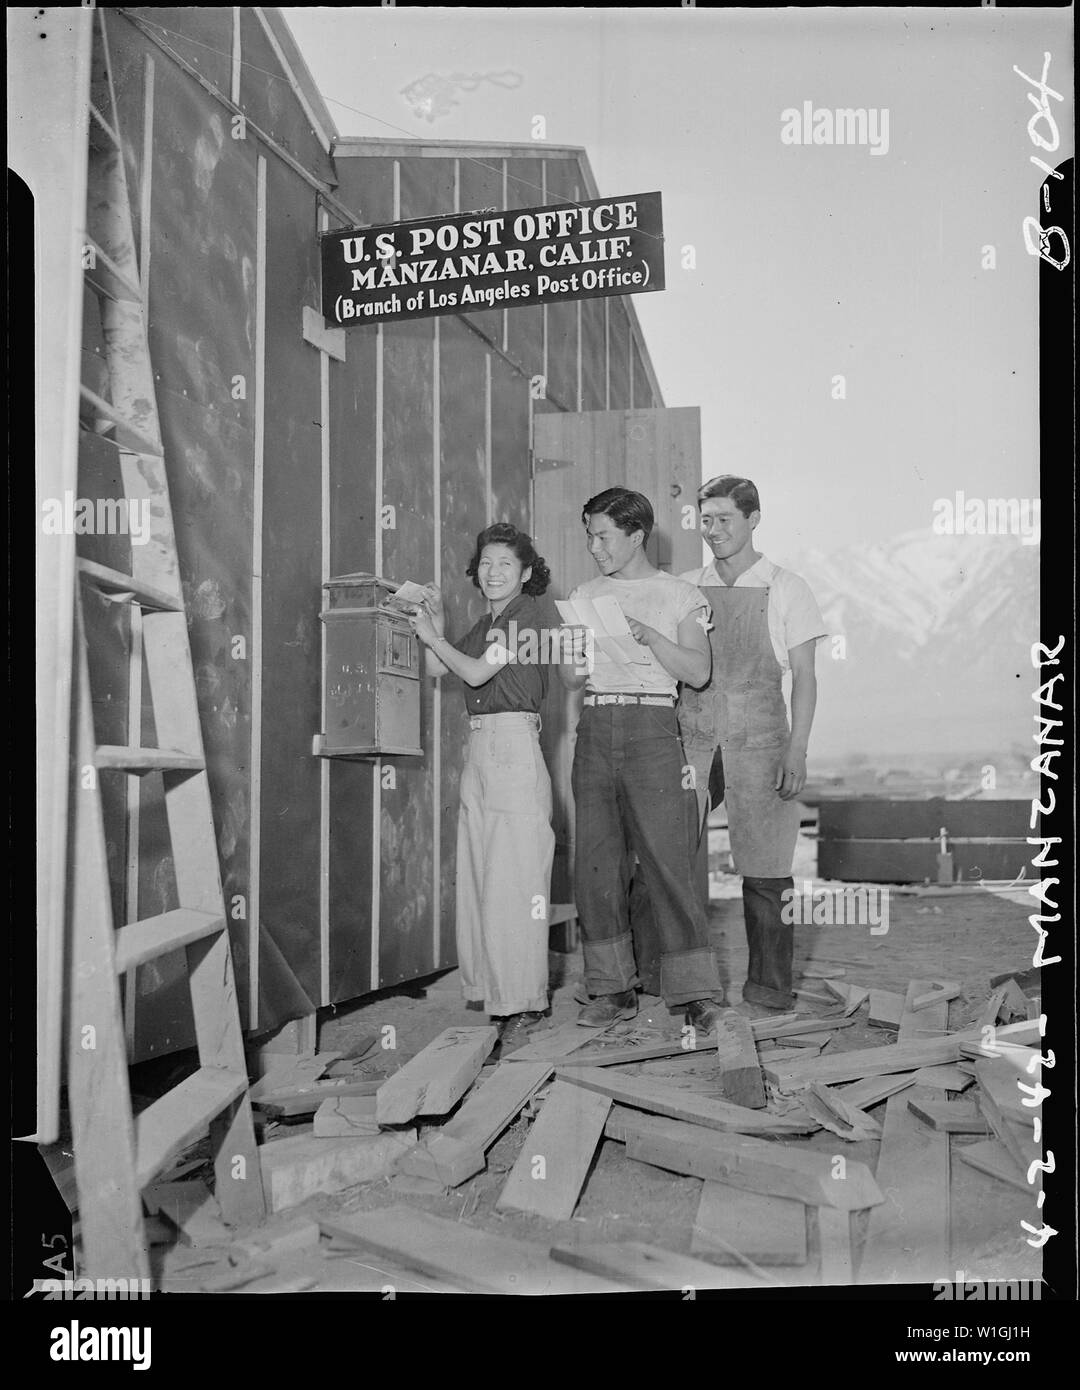 Manzanar Relocation Center, Manzanar, California. Evacuees of Japanese ancestry are enjoying postal . . .; Scope and content:  The full caption for this photograph reads: Manzanar Relocation Center, Manzanar, California. Evacuees of Japanese ancestry are enjoying postal service at this War Relocation Authority center. This is a branch of the Los Angeles Post Office, more than 250 miles away and a two-cent stamp will send a letter to and from Los Angeles. Stock Photo